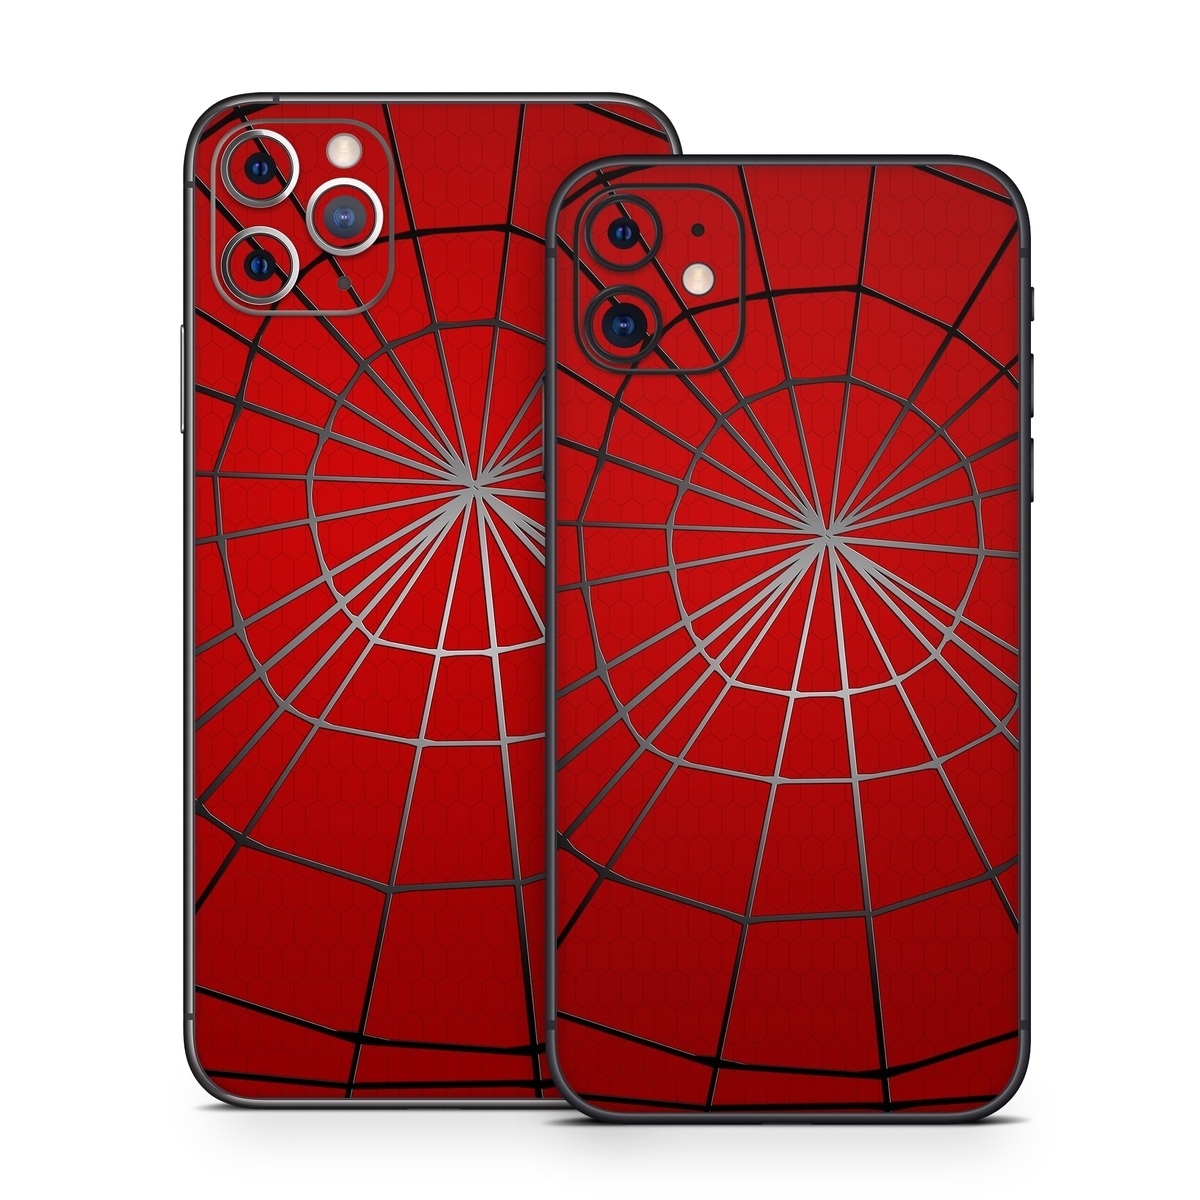 iPhone 11 Skin design of Red, Symmetry, Circle, Pattern, Line, with red, black, gray colors